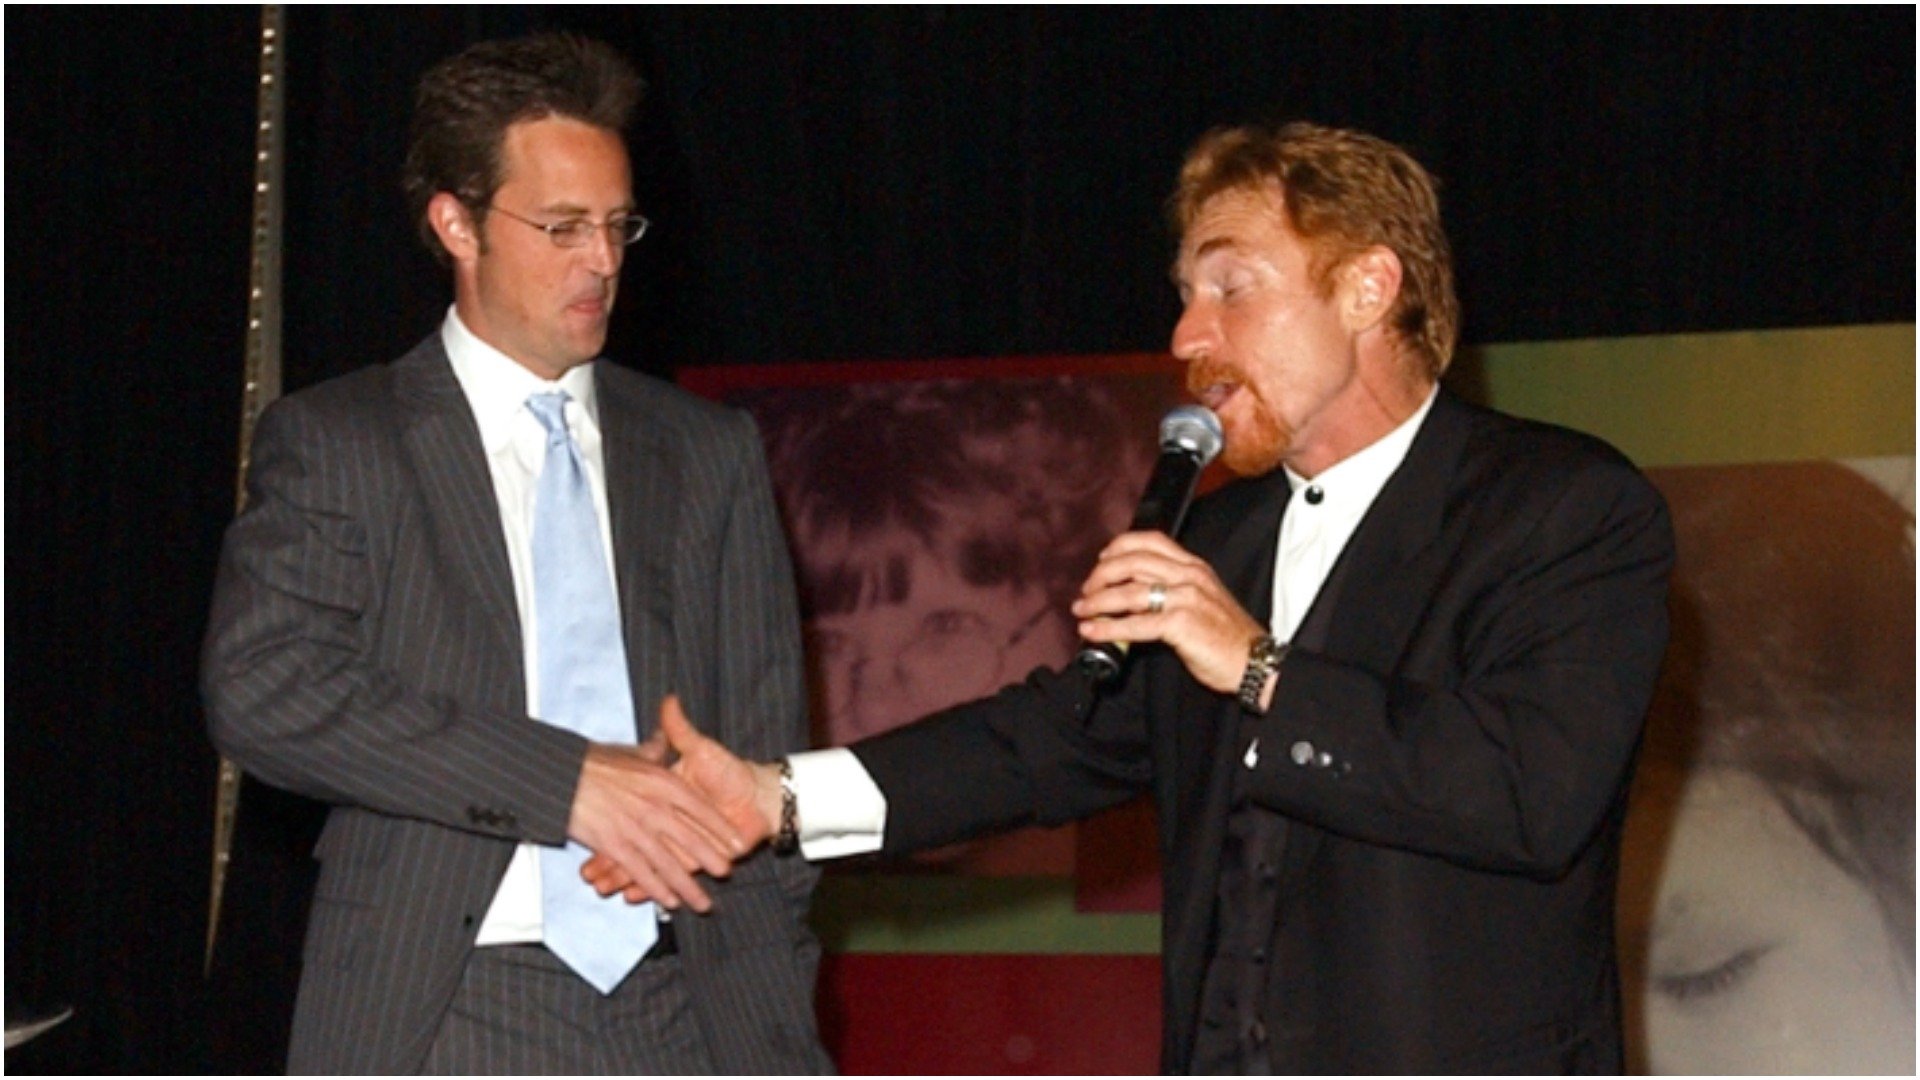 Matthew Perry and Danny Bonaduce shake hands on stage as Bonaduce holds a microphone 